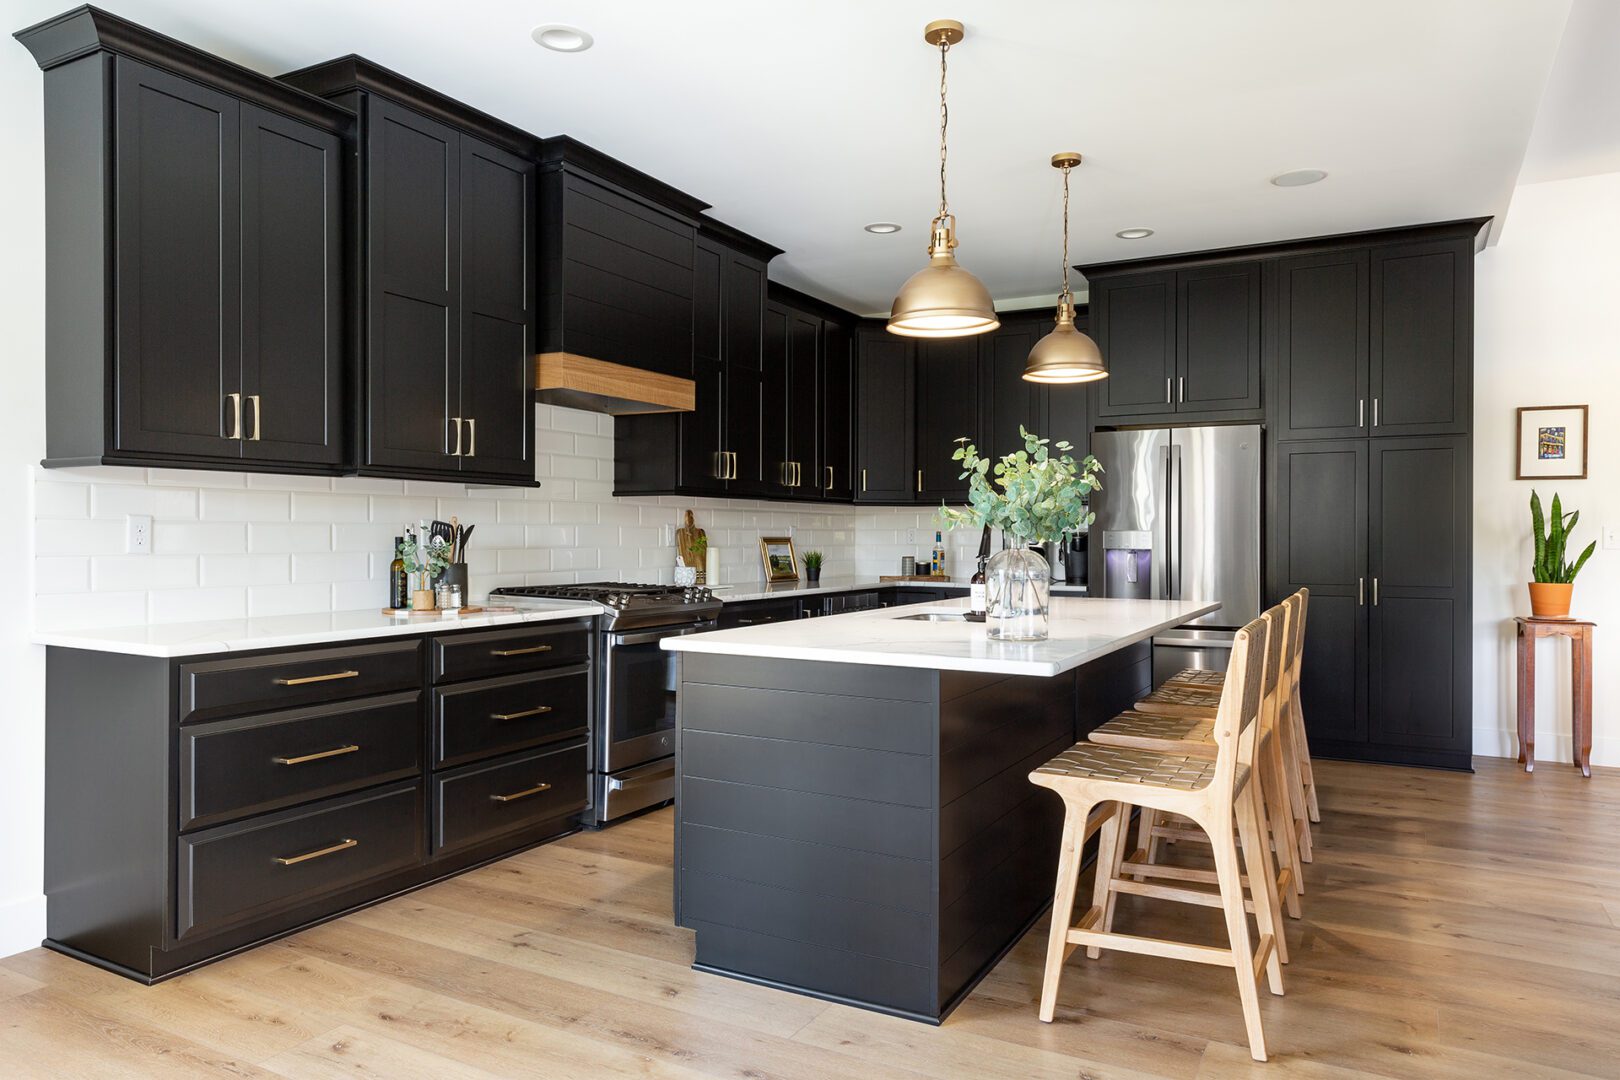 A kitchen with black cabinets and white counter tops.